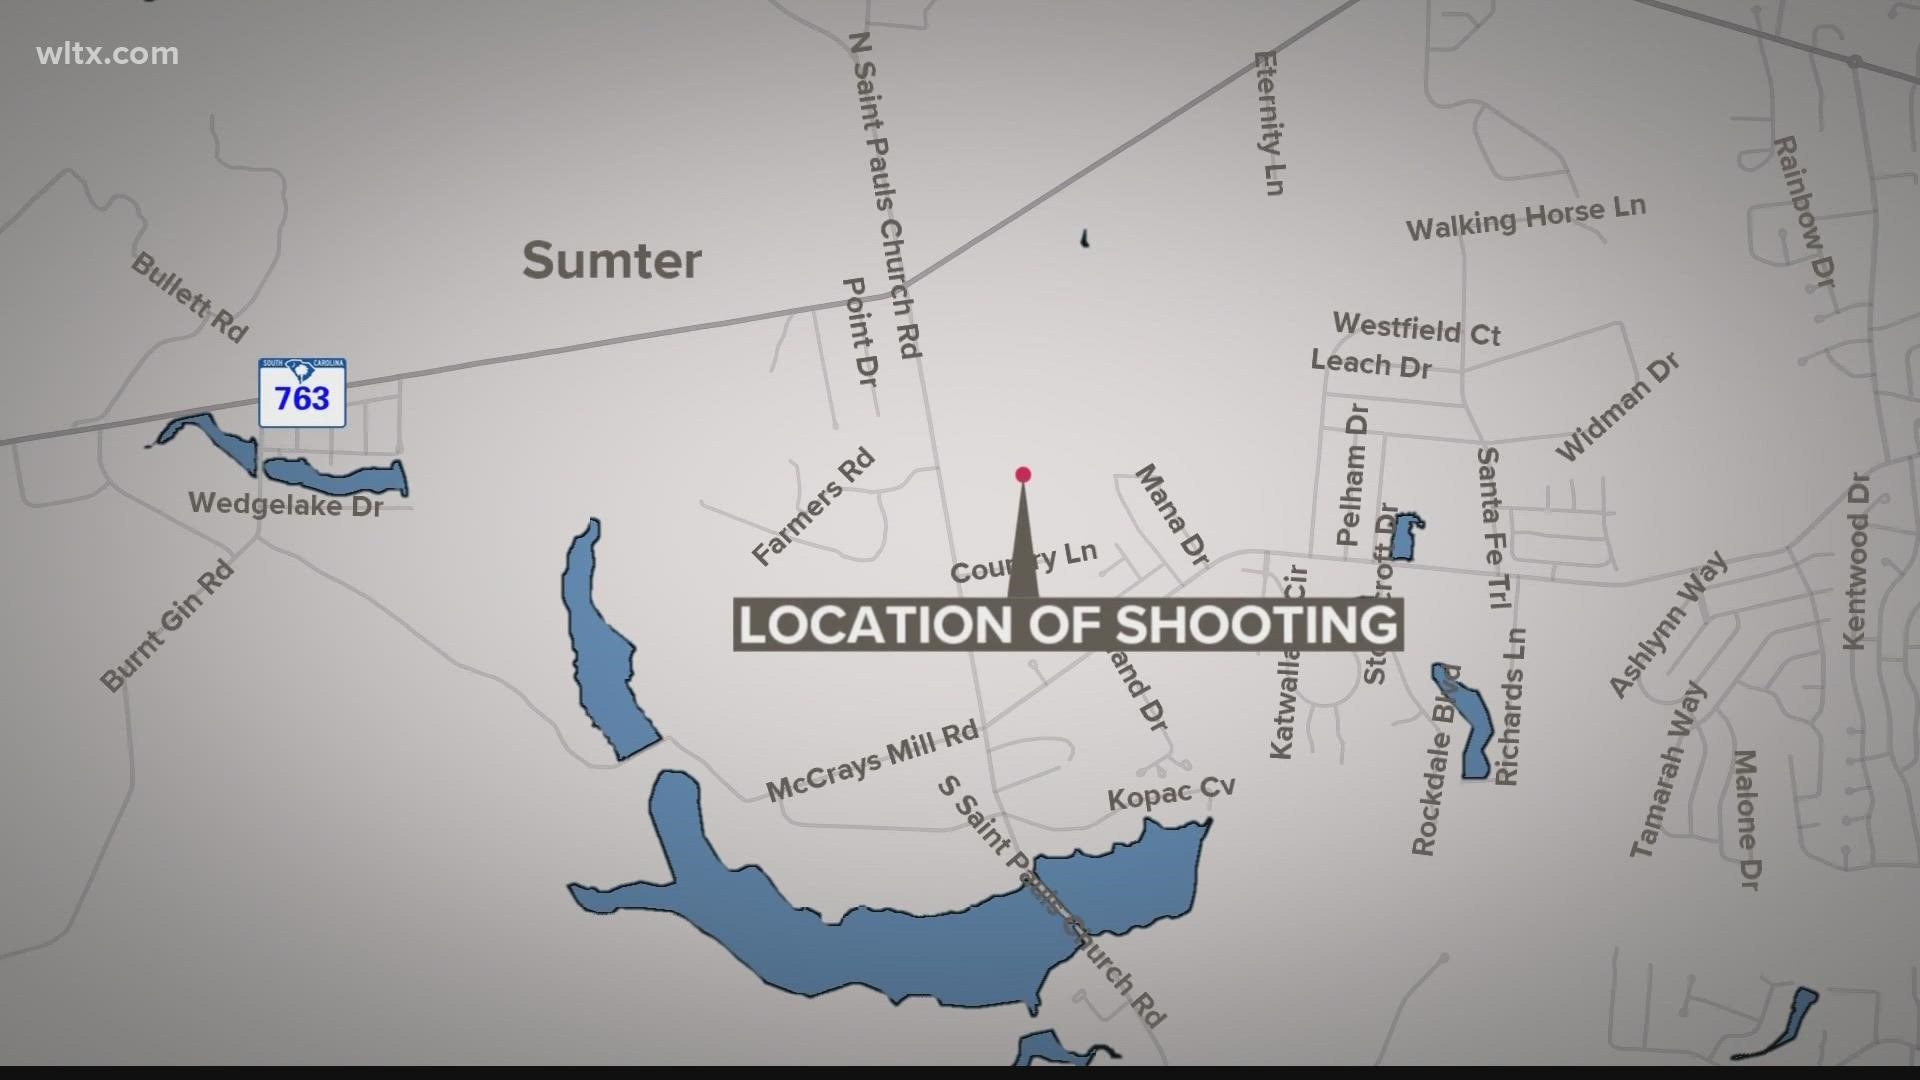 A Sumter woman is in critical condition after being shot outside her home , according to deputies.